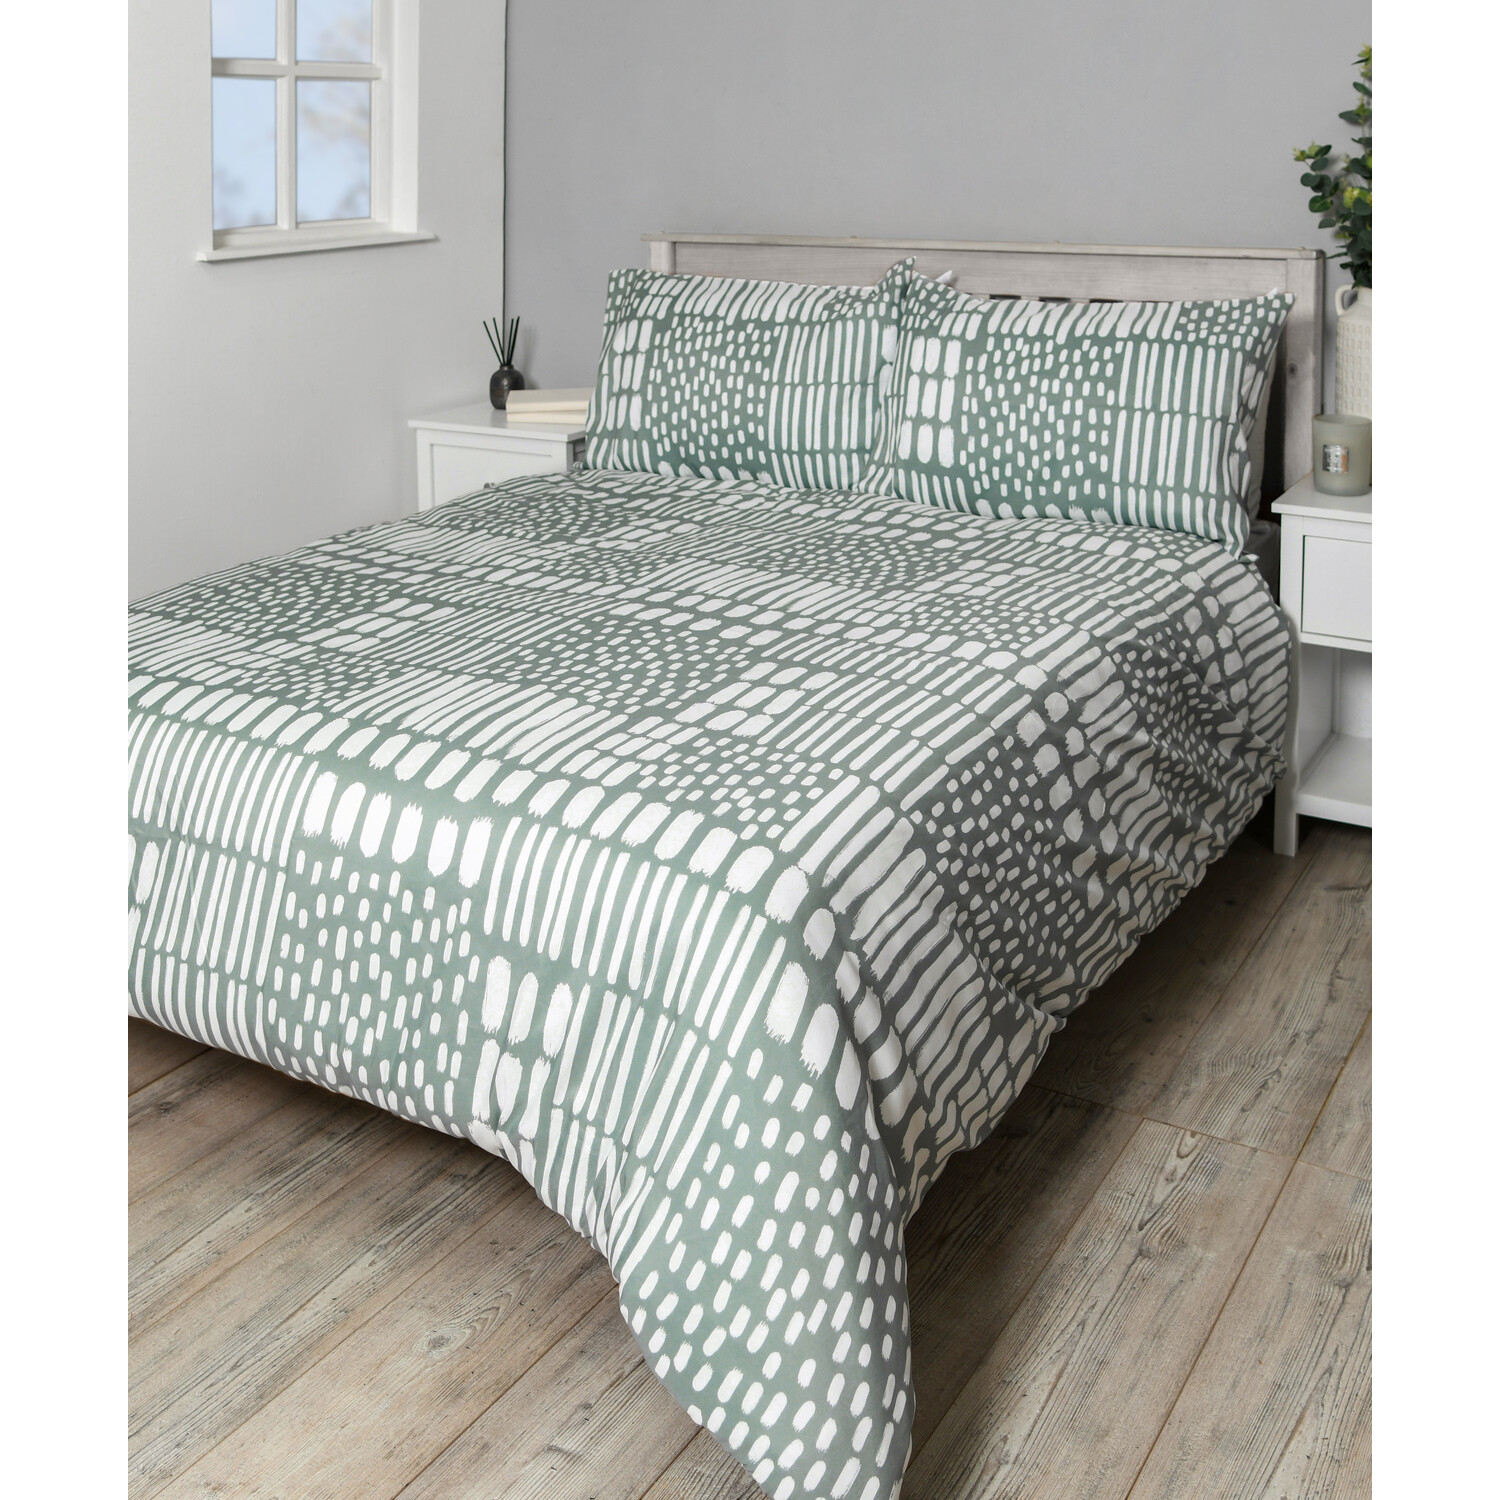 My Home Kailani King Size Sage Duvet Cover and Pillowcase Set Image 2